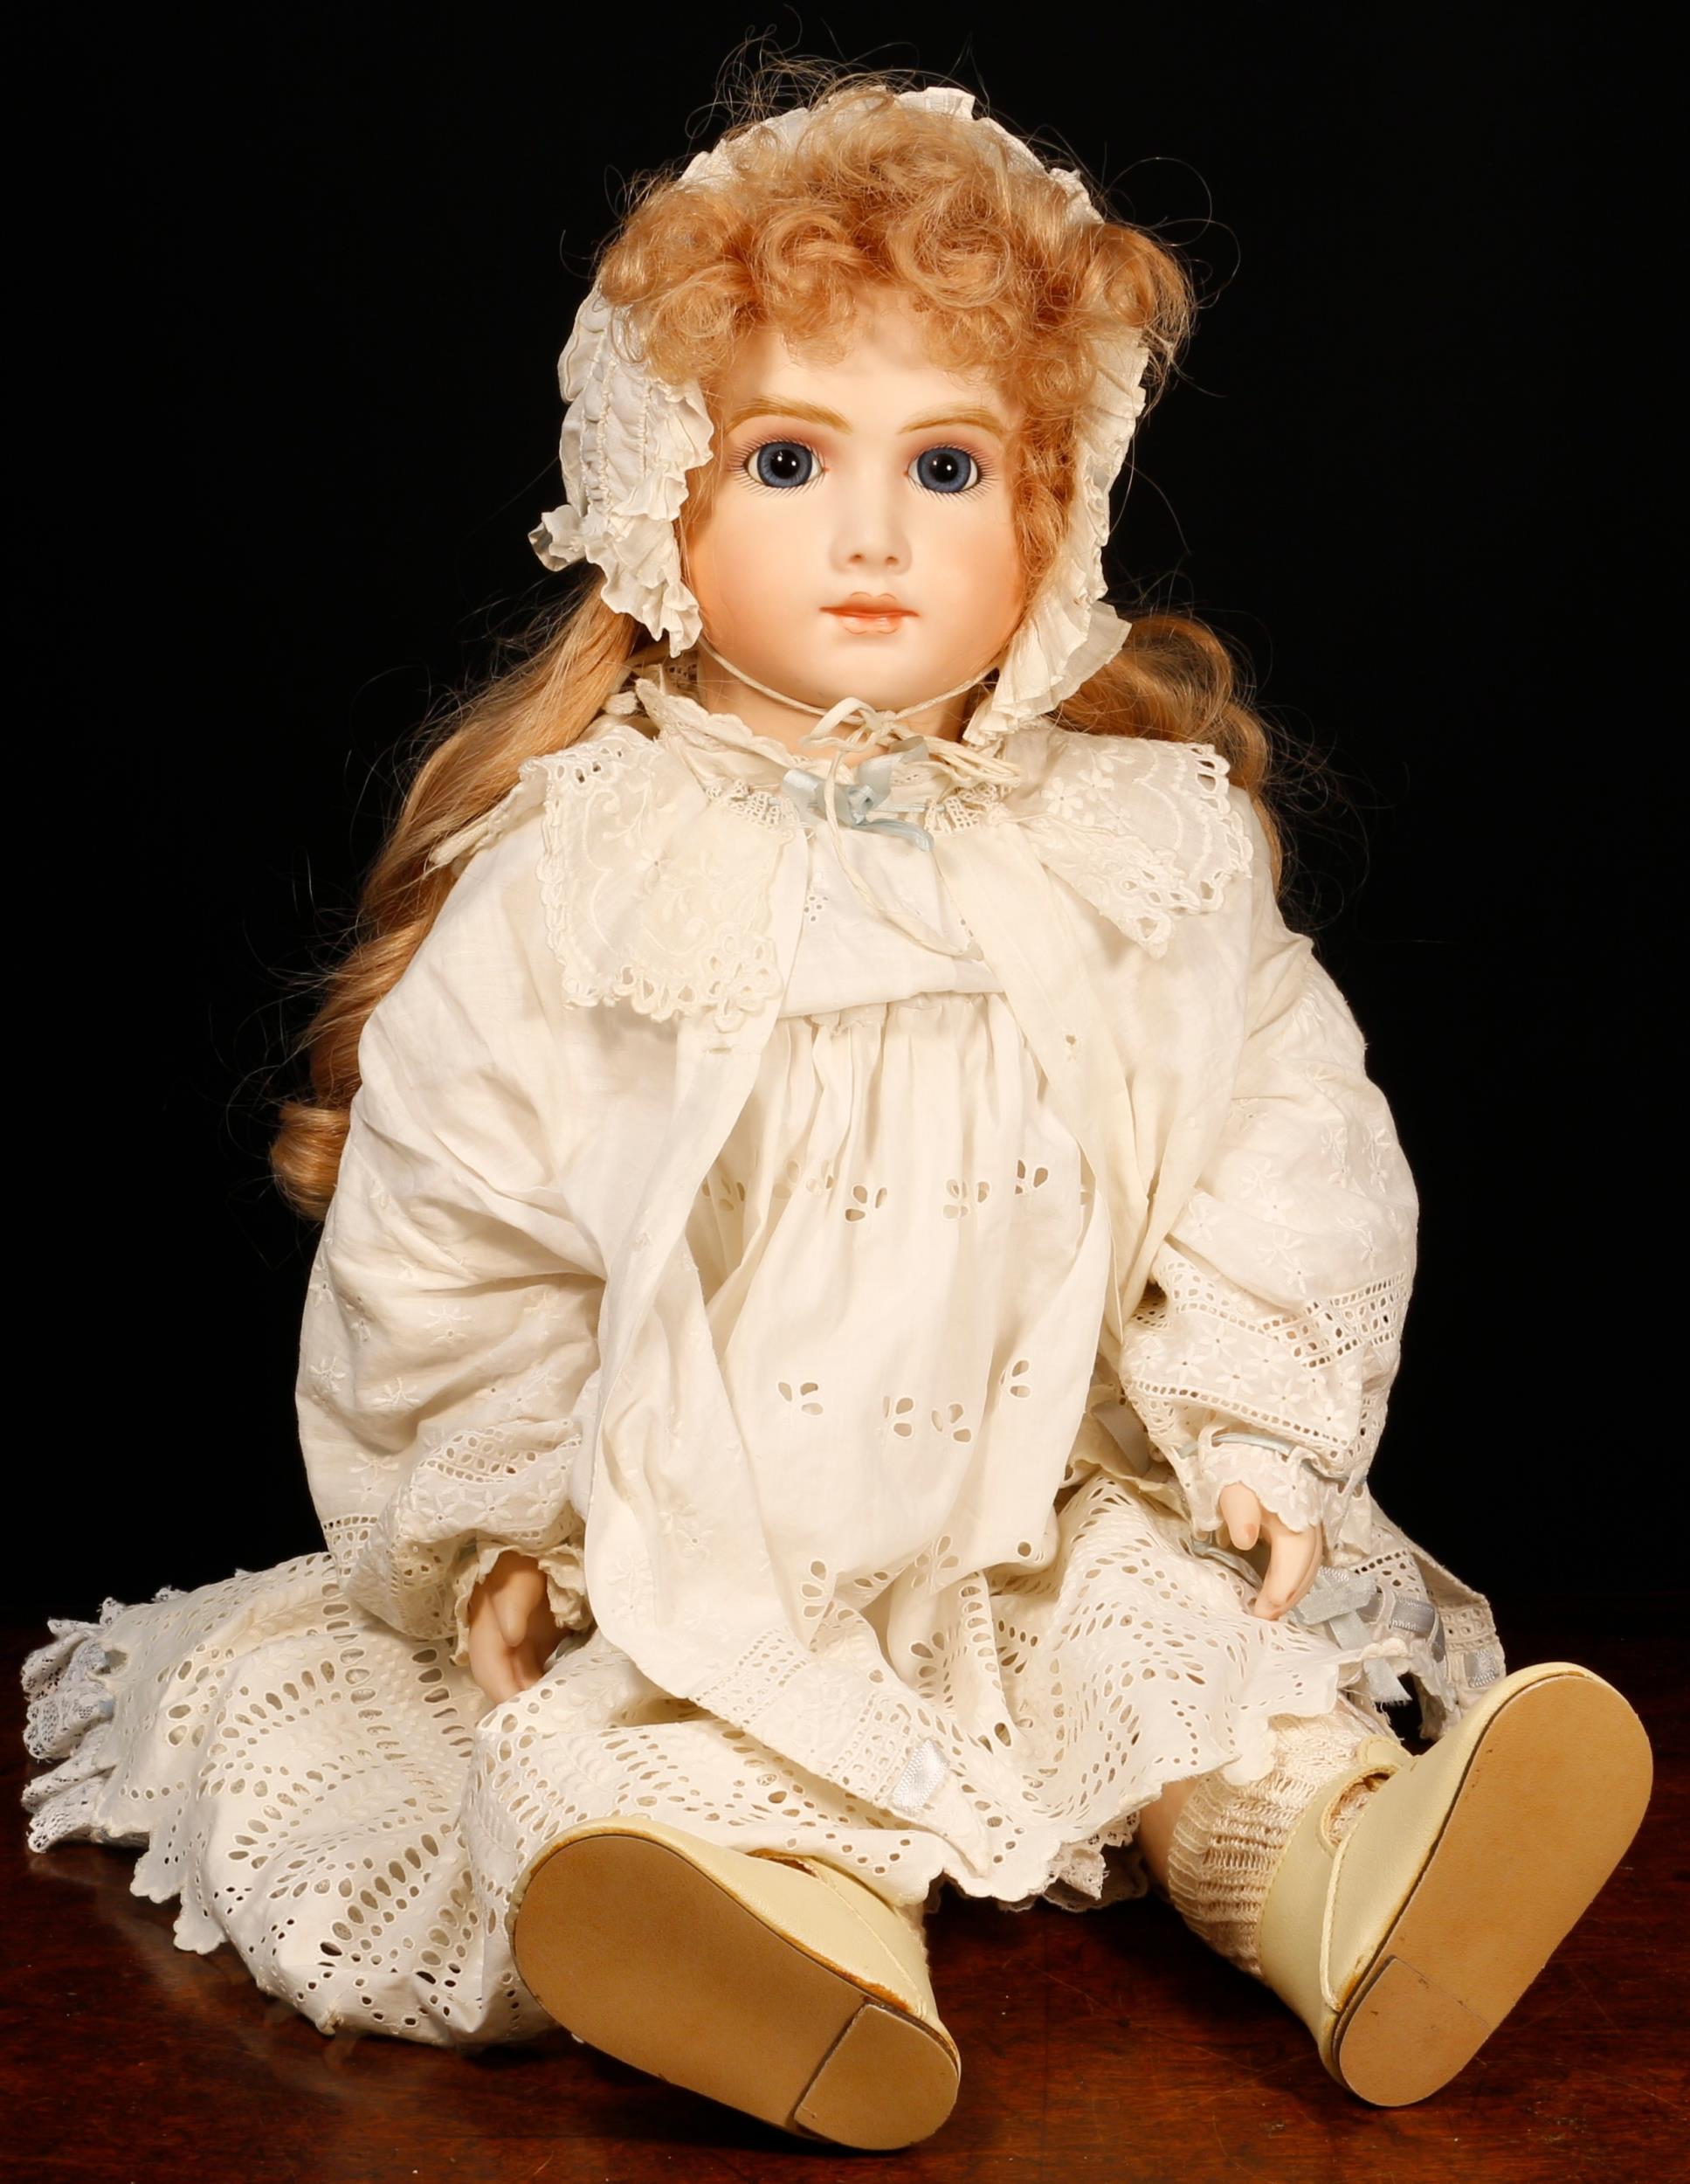 A reproduction bisque head doll, the bisque head inset with fixed blue glass eyes, painted